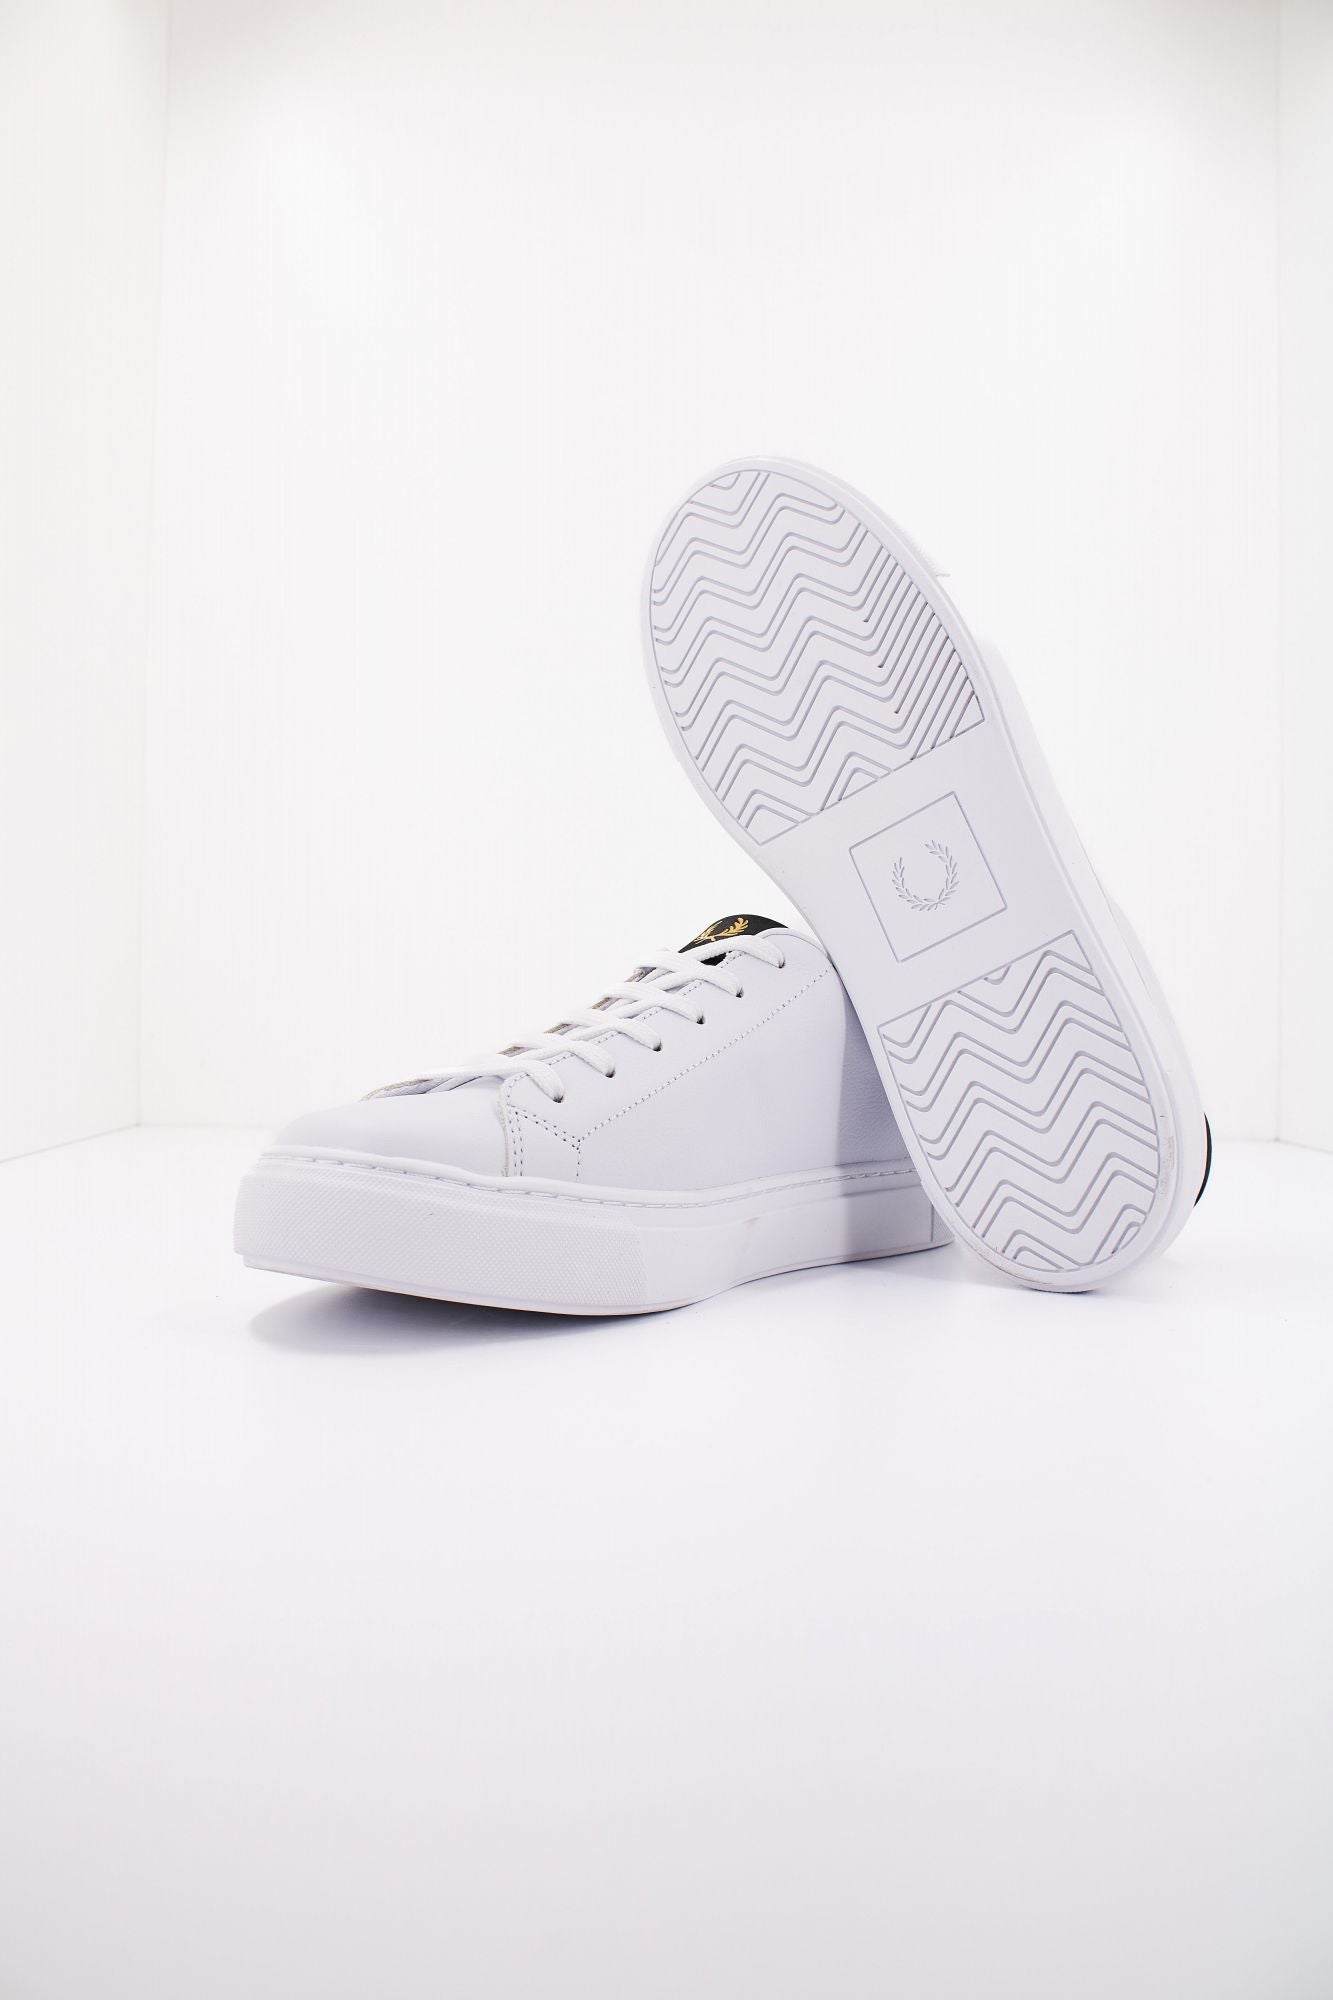 FRED PERRY B71 TUMBLED LEATHER en color BLANCO (4)